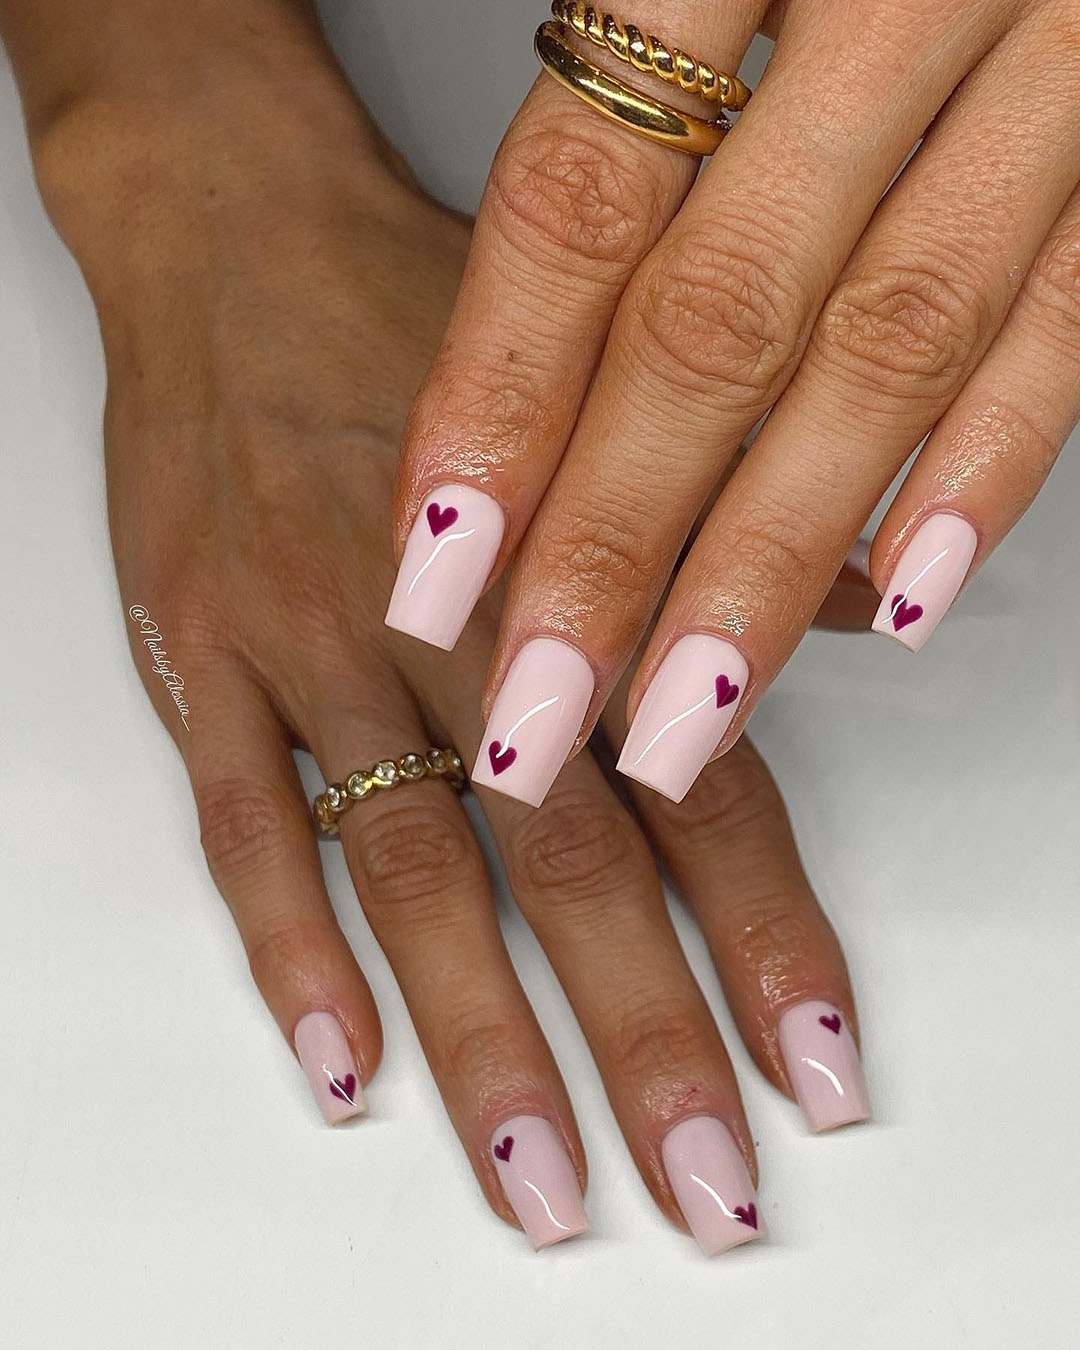 nail art with simple hearts design.